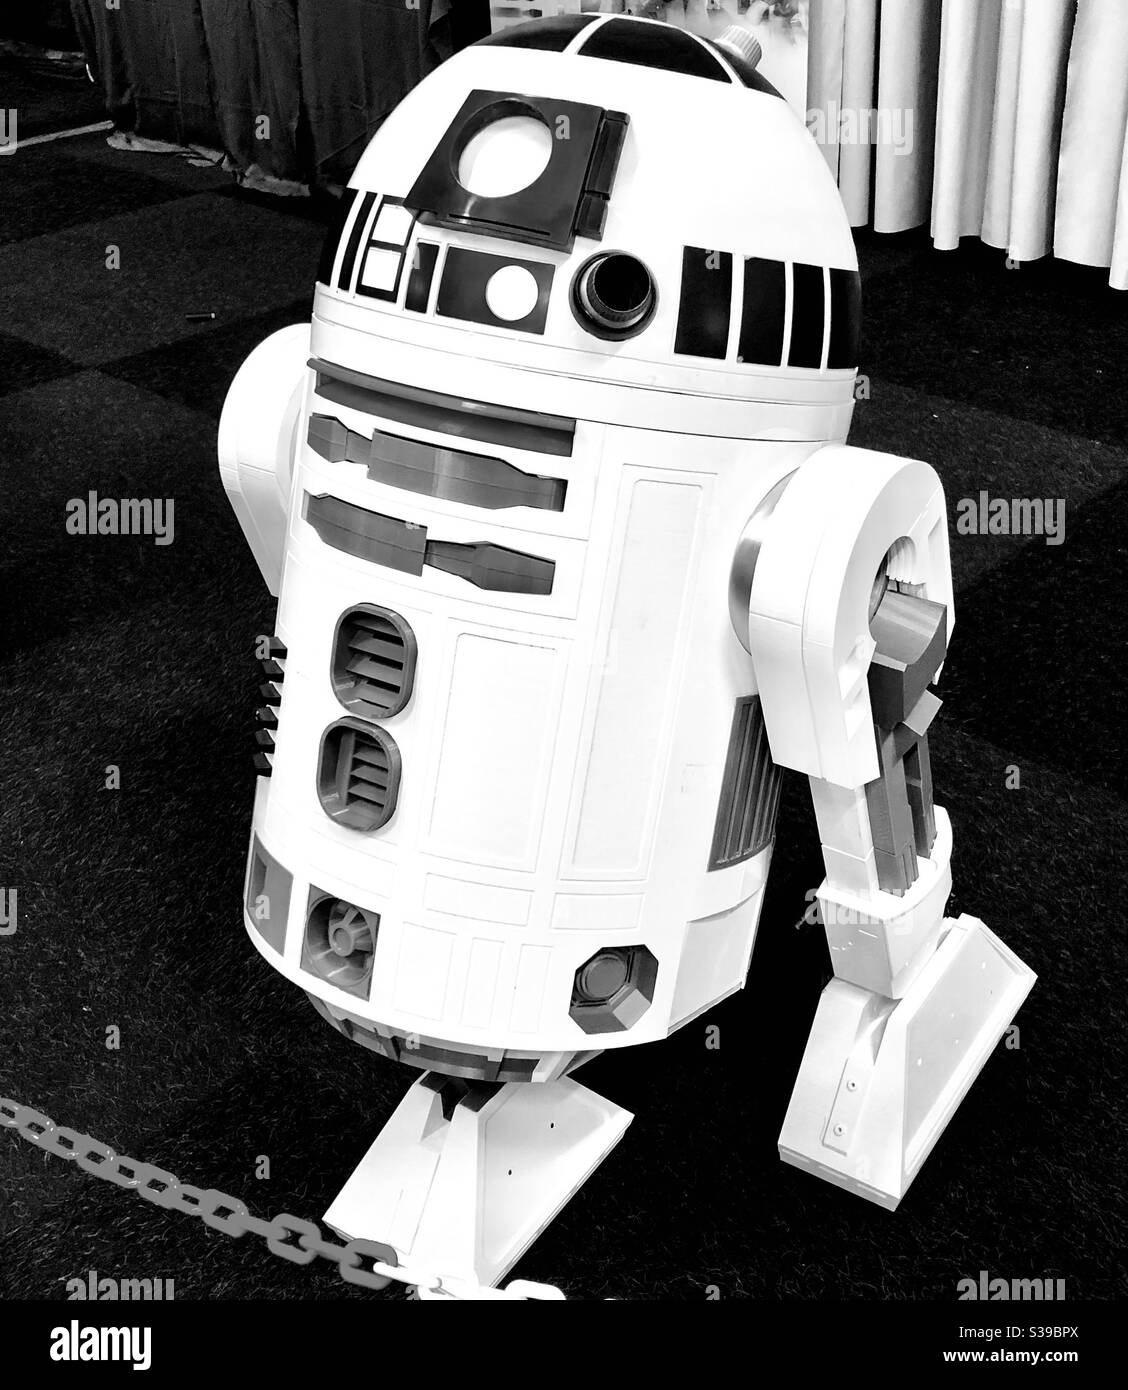 https://c8.alamy.com/comp/S39BPX/r2-d2-from-star-wars-in-a-science-fiction-convention-S39BPX.jpg